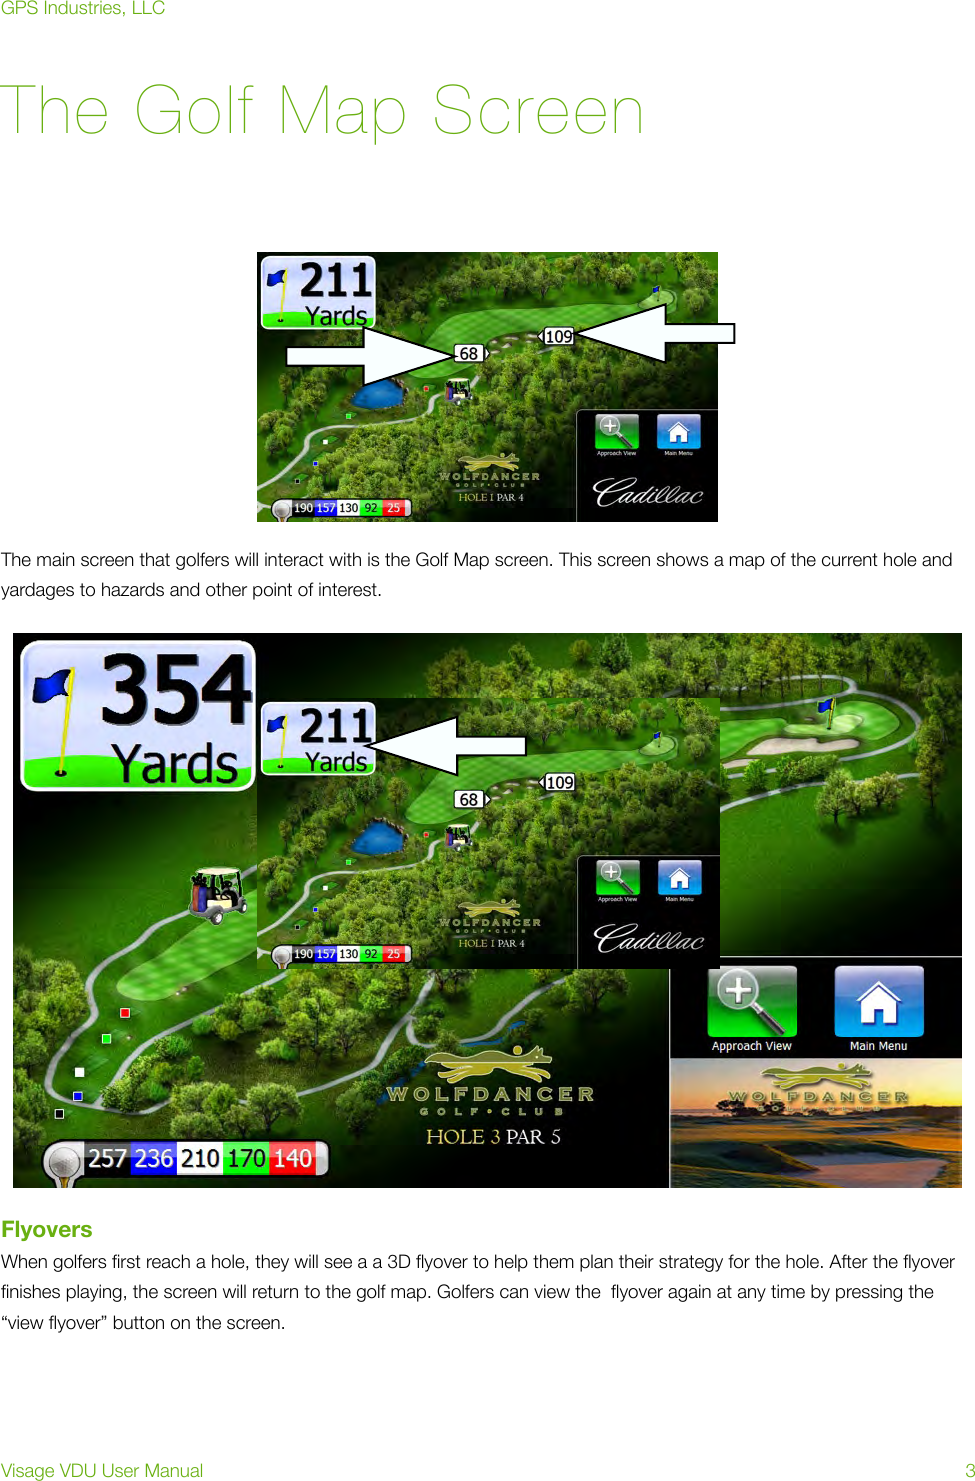 The Golf Map ScreenThe main screen that golfers will interact with is the Golf Map screen. This screen shows a map of the current hole and yardages to hazards and other point of interest. FlyoversWhen golfers ﬁrst reach a hole, they will see a a 3D ﬂyover to help them plan their strategy for the hole. After the ﬂyover ﬁnishes playing, the screen will return to the golf map. Golfers can view the  ﬂyover again at any time by pressing the “view ﬂyover” button on the screen.GPS Industries, LLCVisage VDU User Manual!3